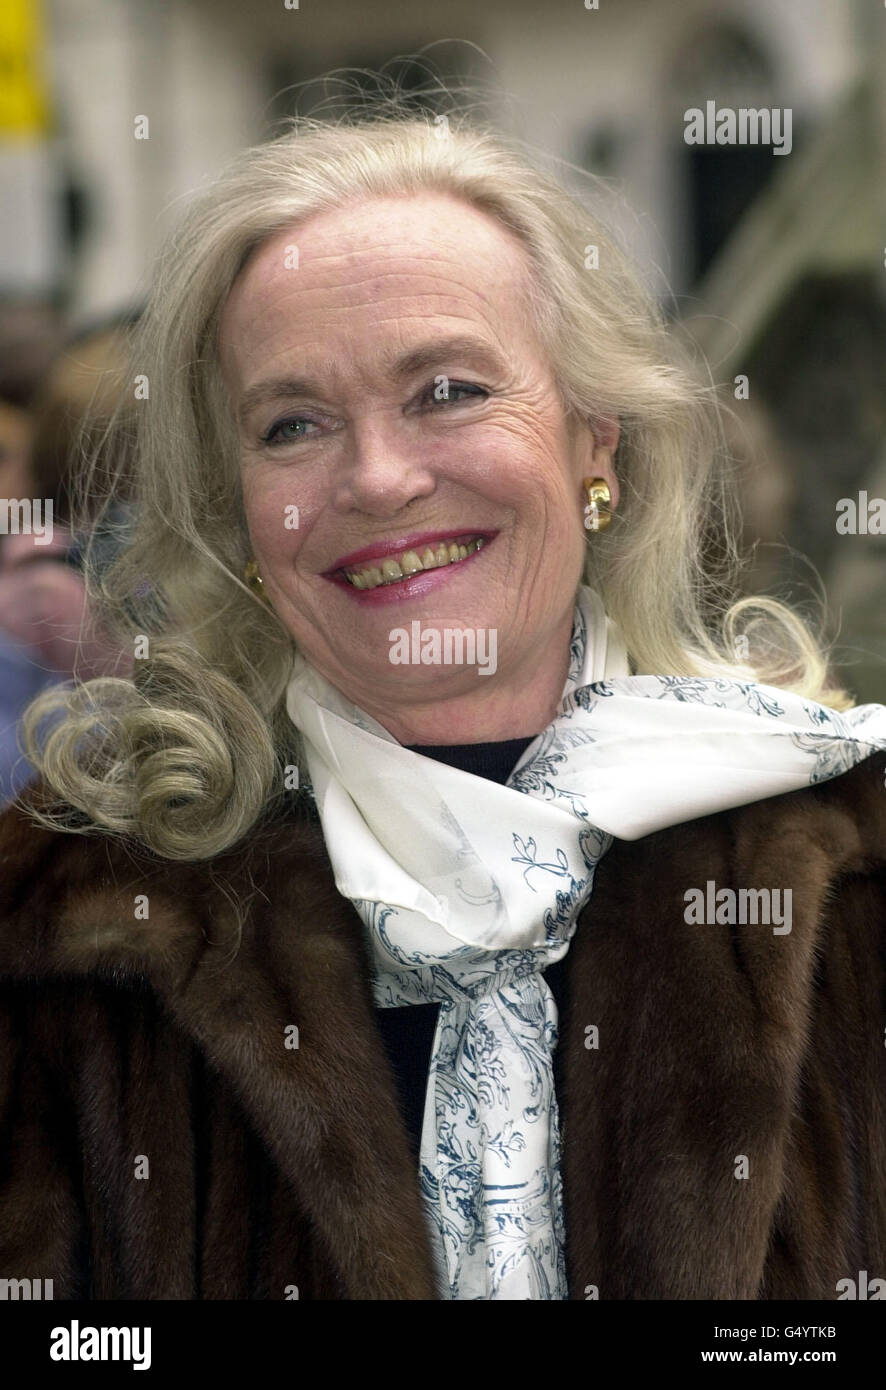 Former Bond girl, actress Shirley Eaton, who starred in Goldfinger, arrives at the memorial service for James Bond's 'Q', Desmond Llewelyn, in Knightsbridge, London. Stock Photo